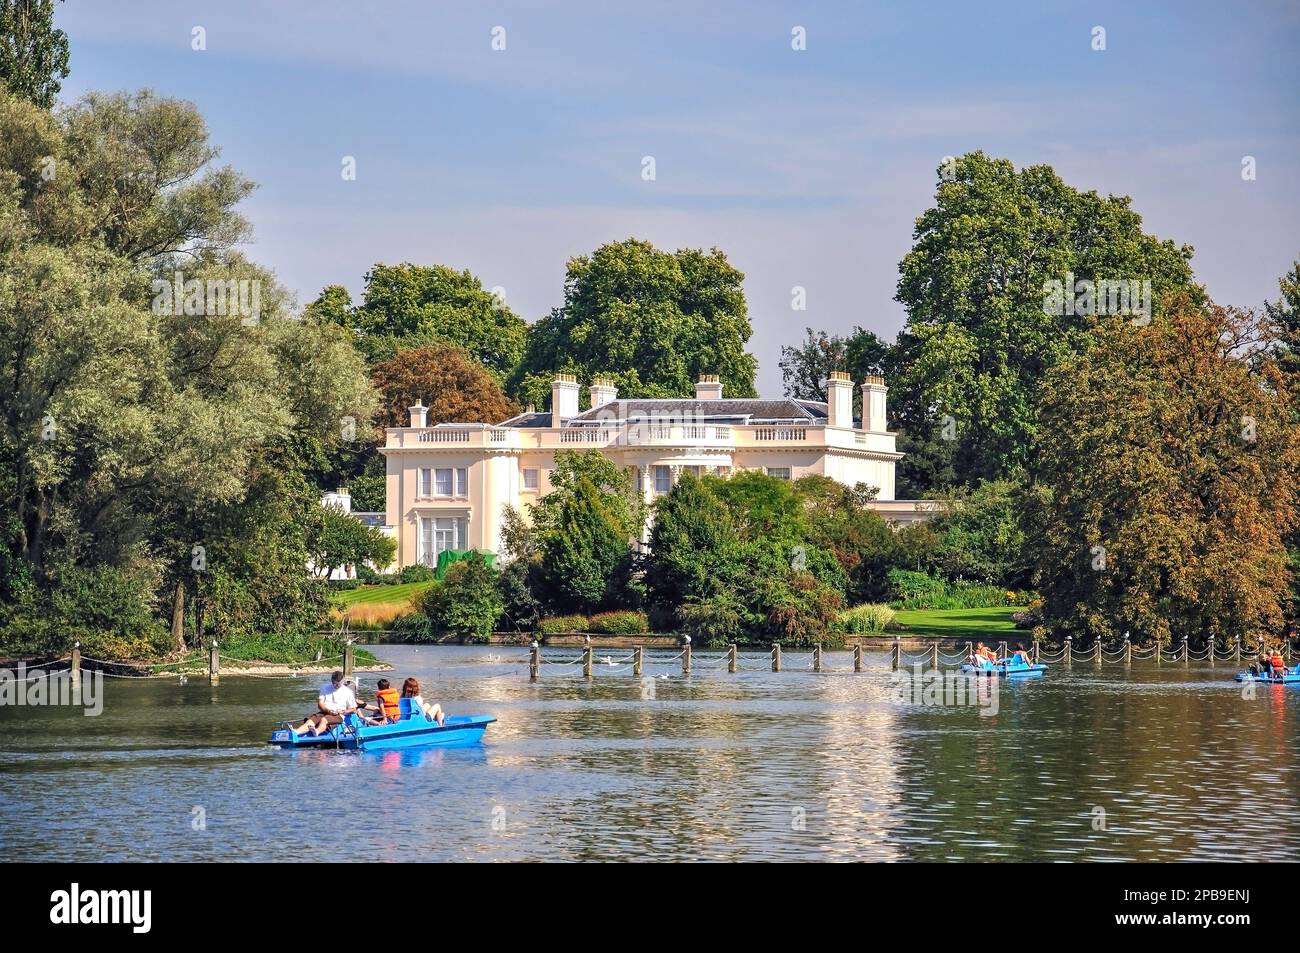 The Holme Property by Boating Lake, Regent's Park, City of Westminster, Greater London, England, Regno Unito Foto Stock